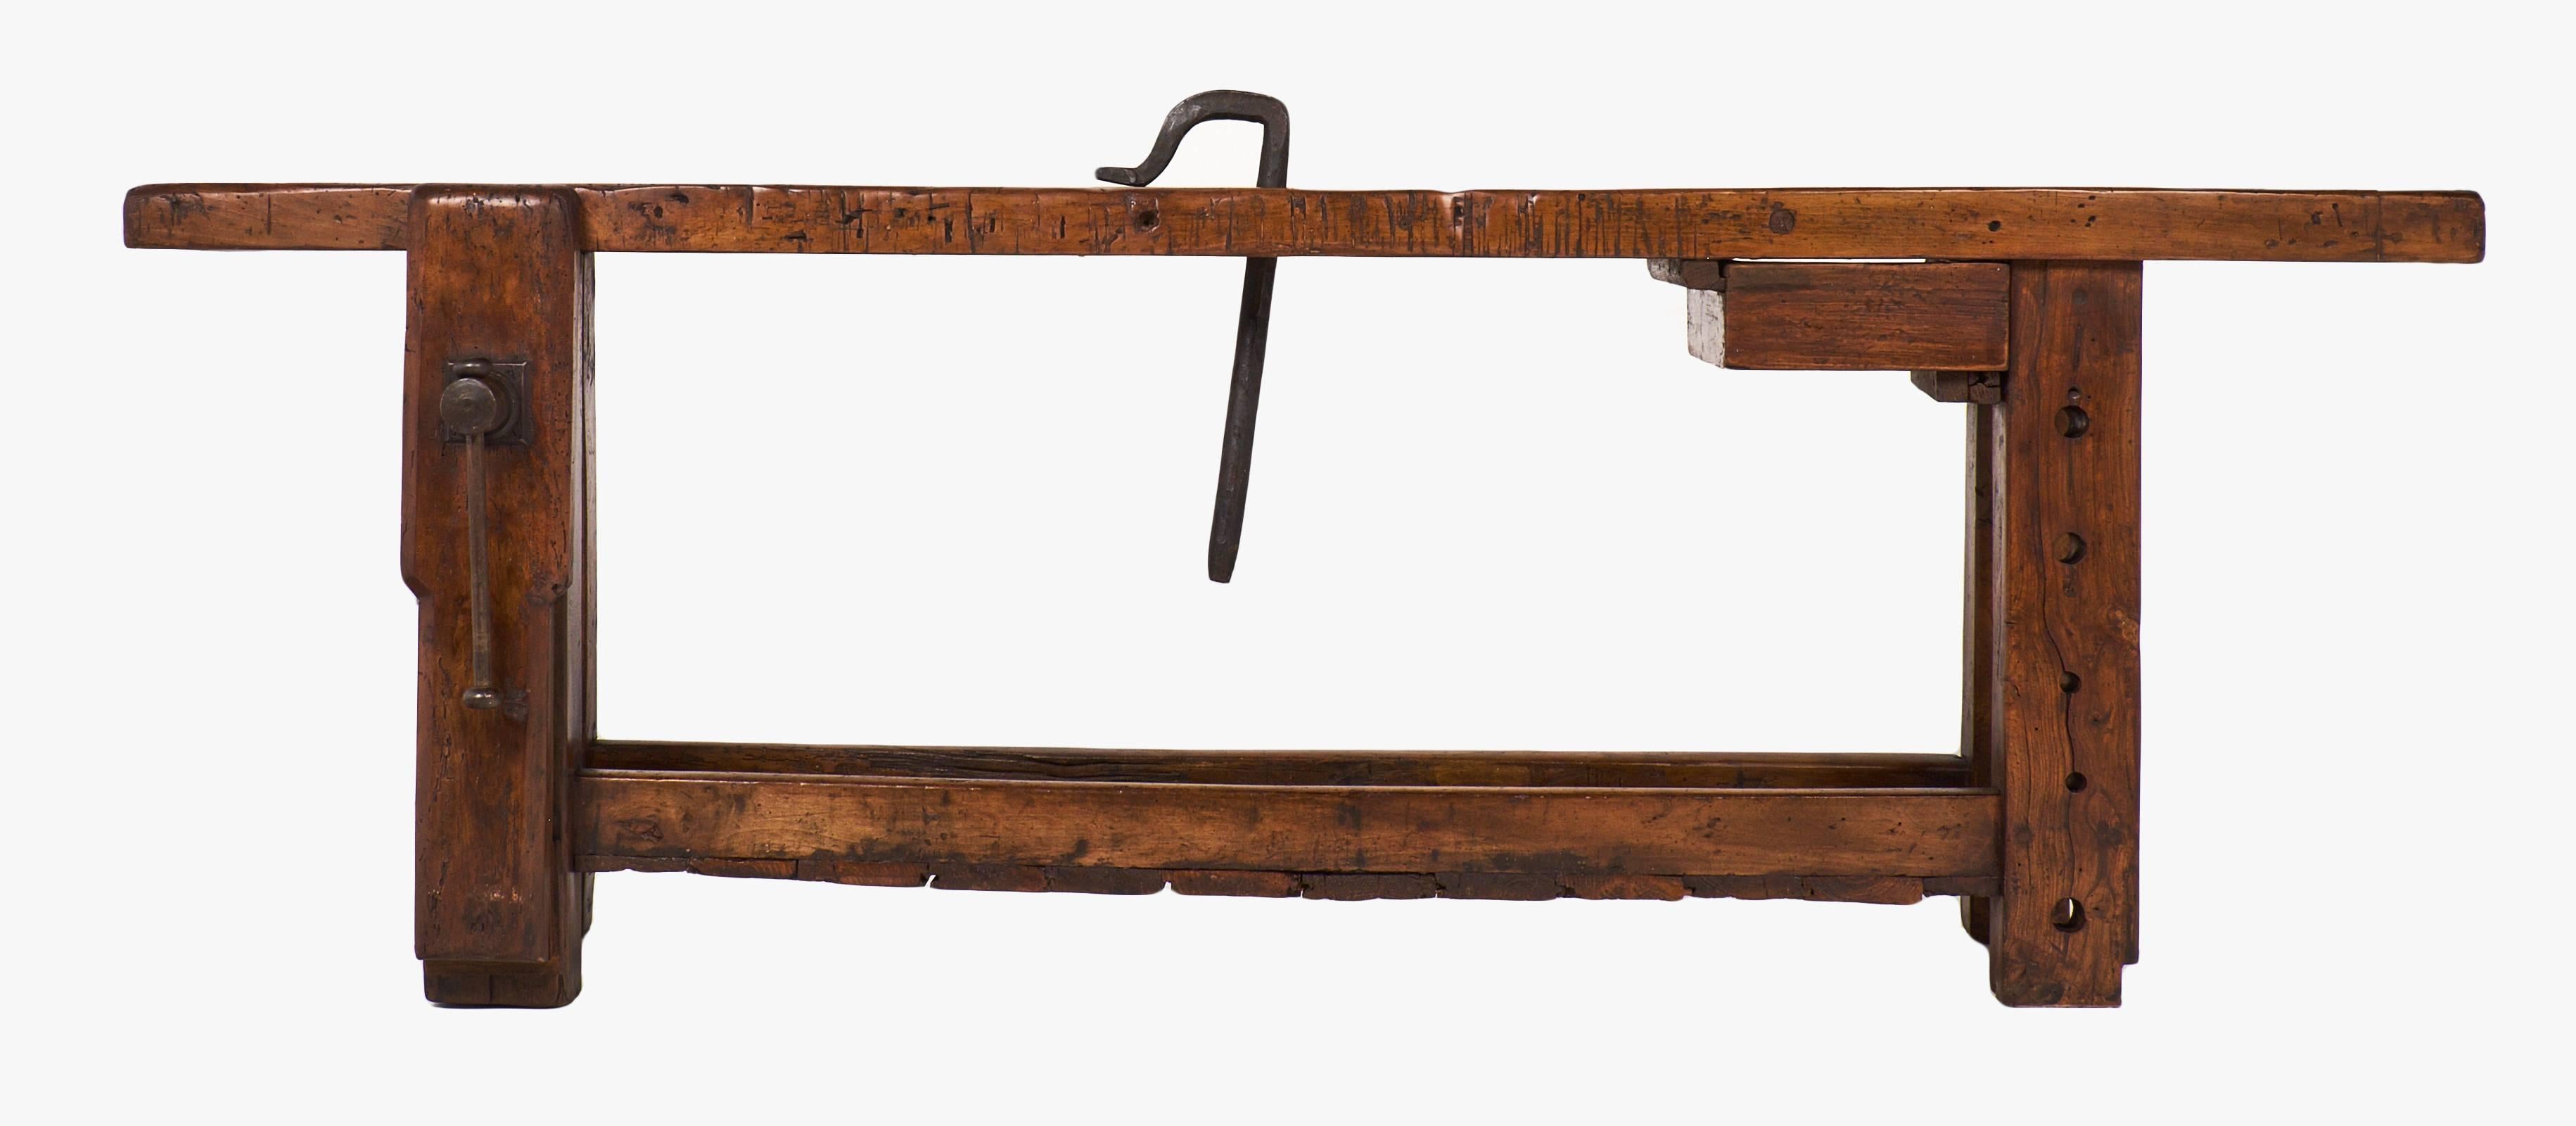 Forged French Mid-19th Century Workbench